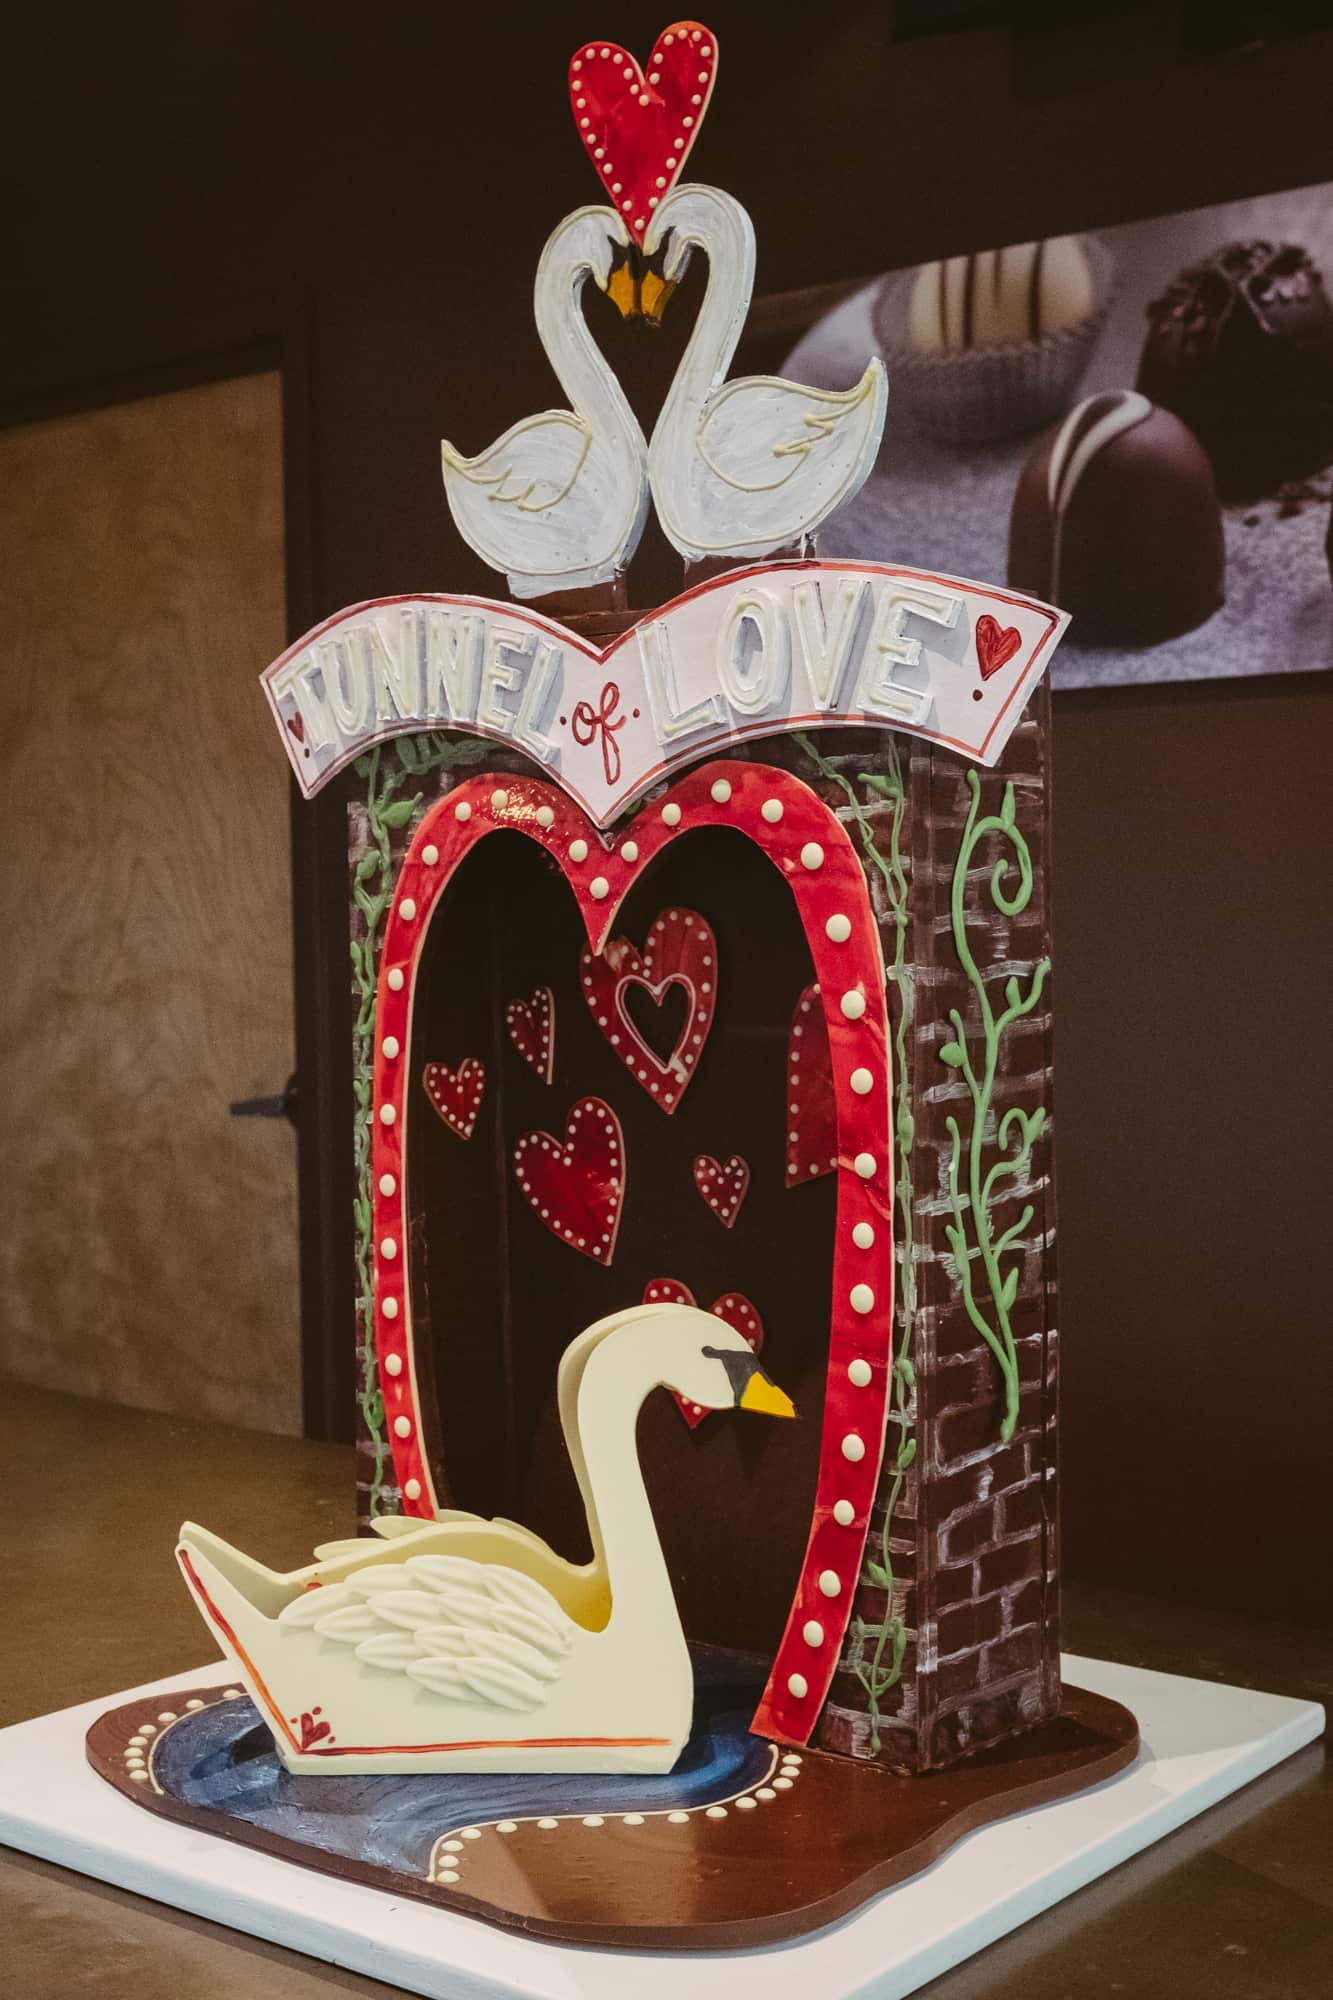 Tunnel of Love chocolate sculpture